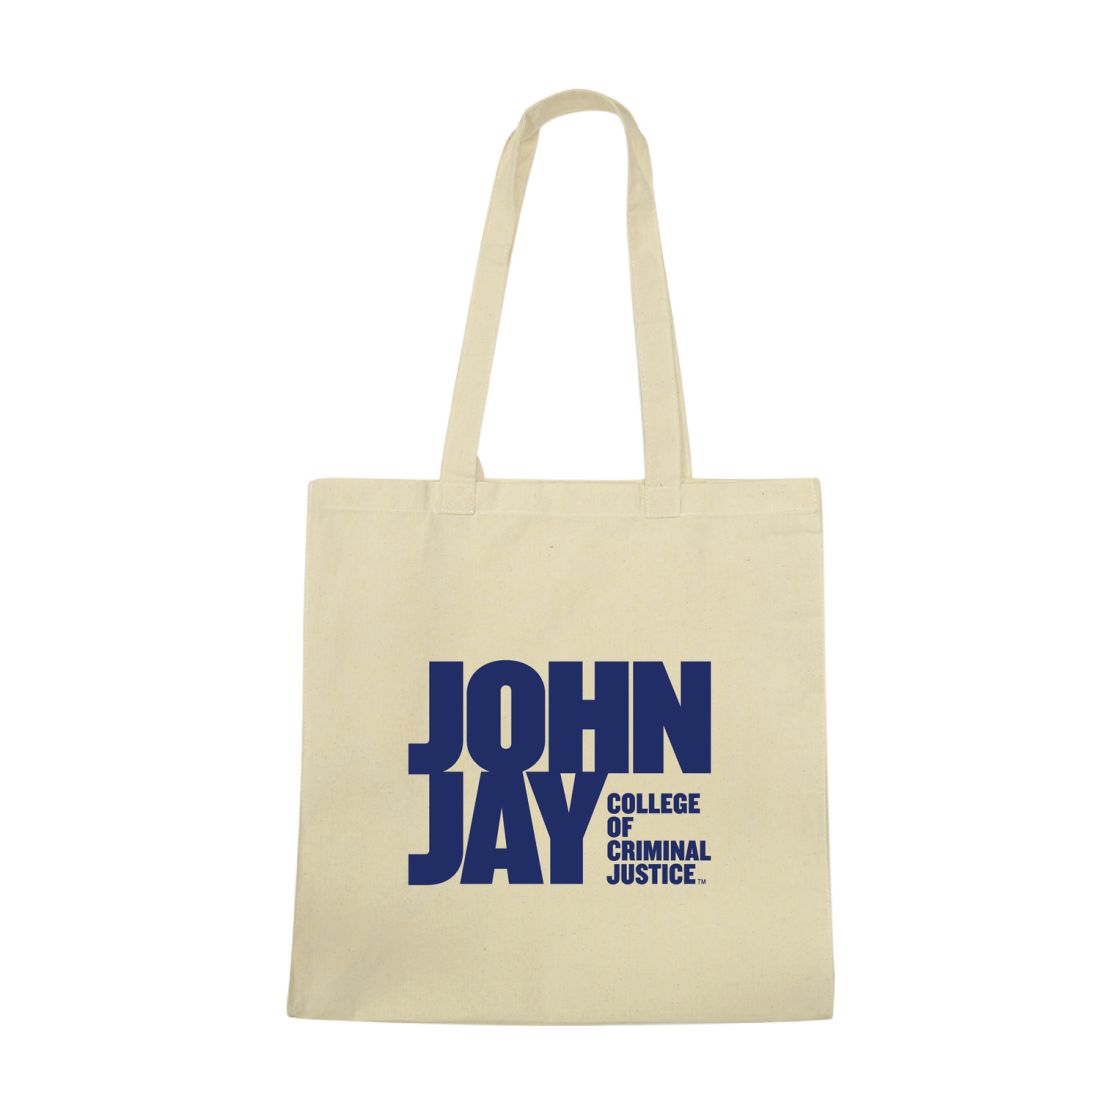 John Jay College of Criminal Justice Bloodhounds Institutional Tote Bag